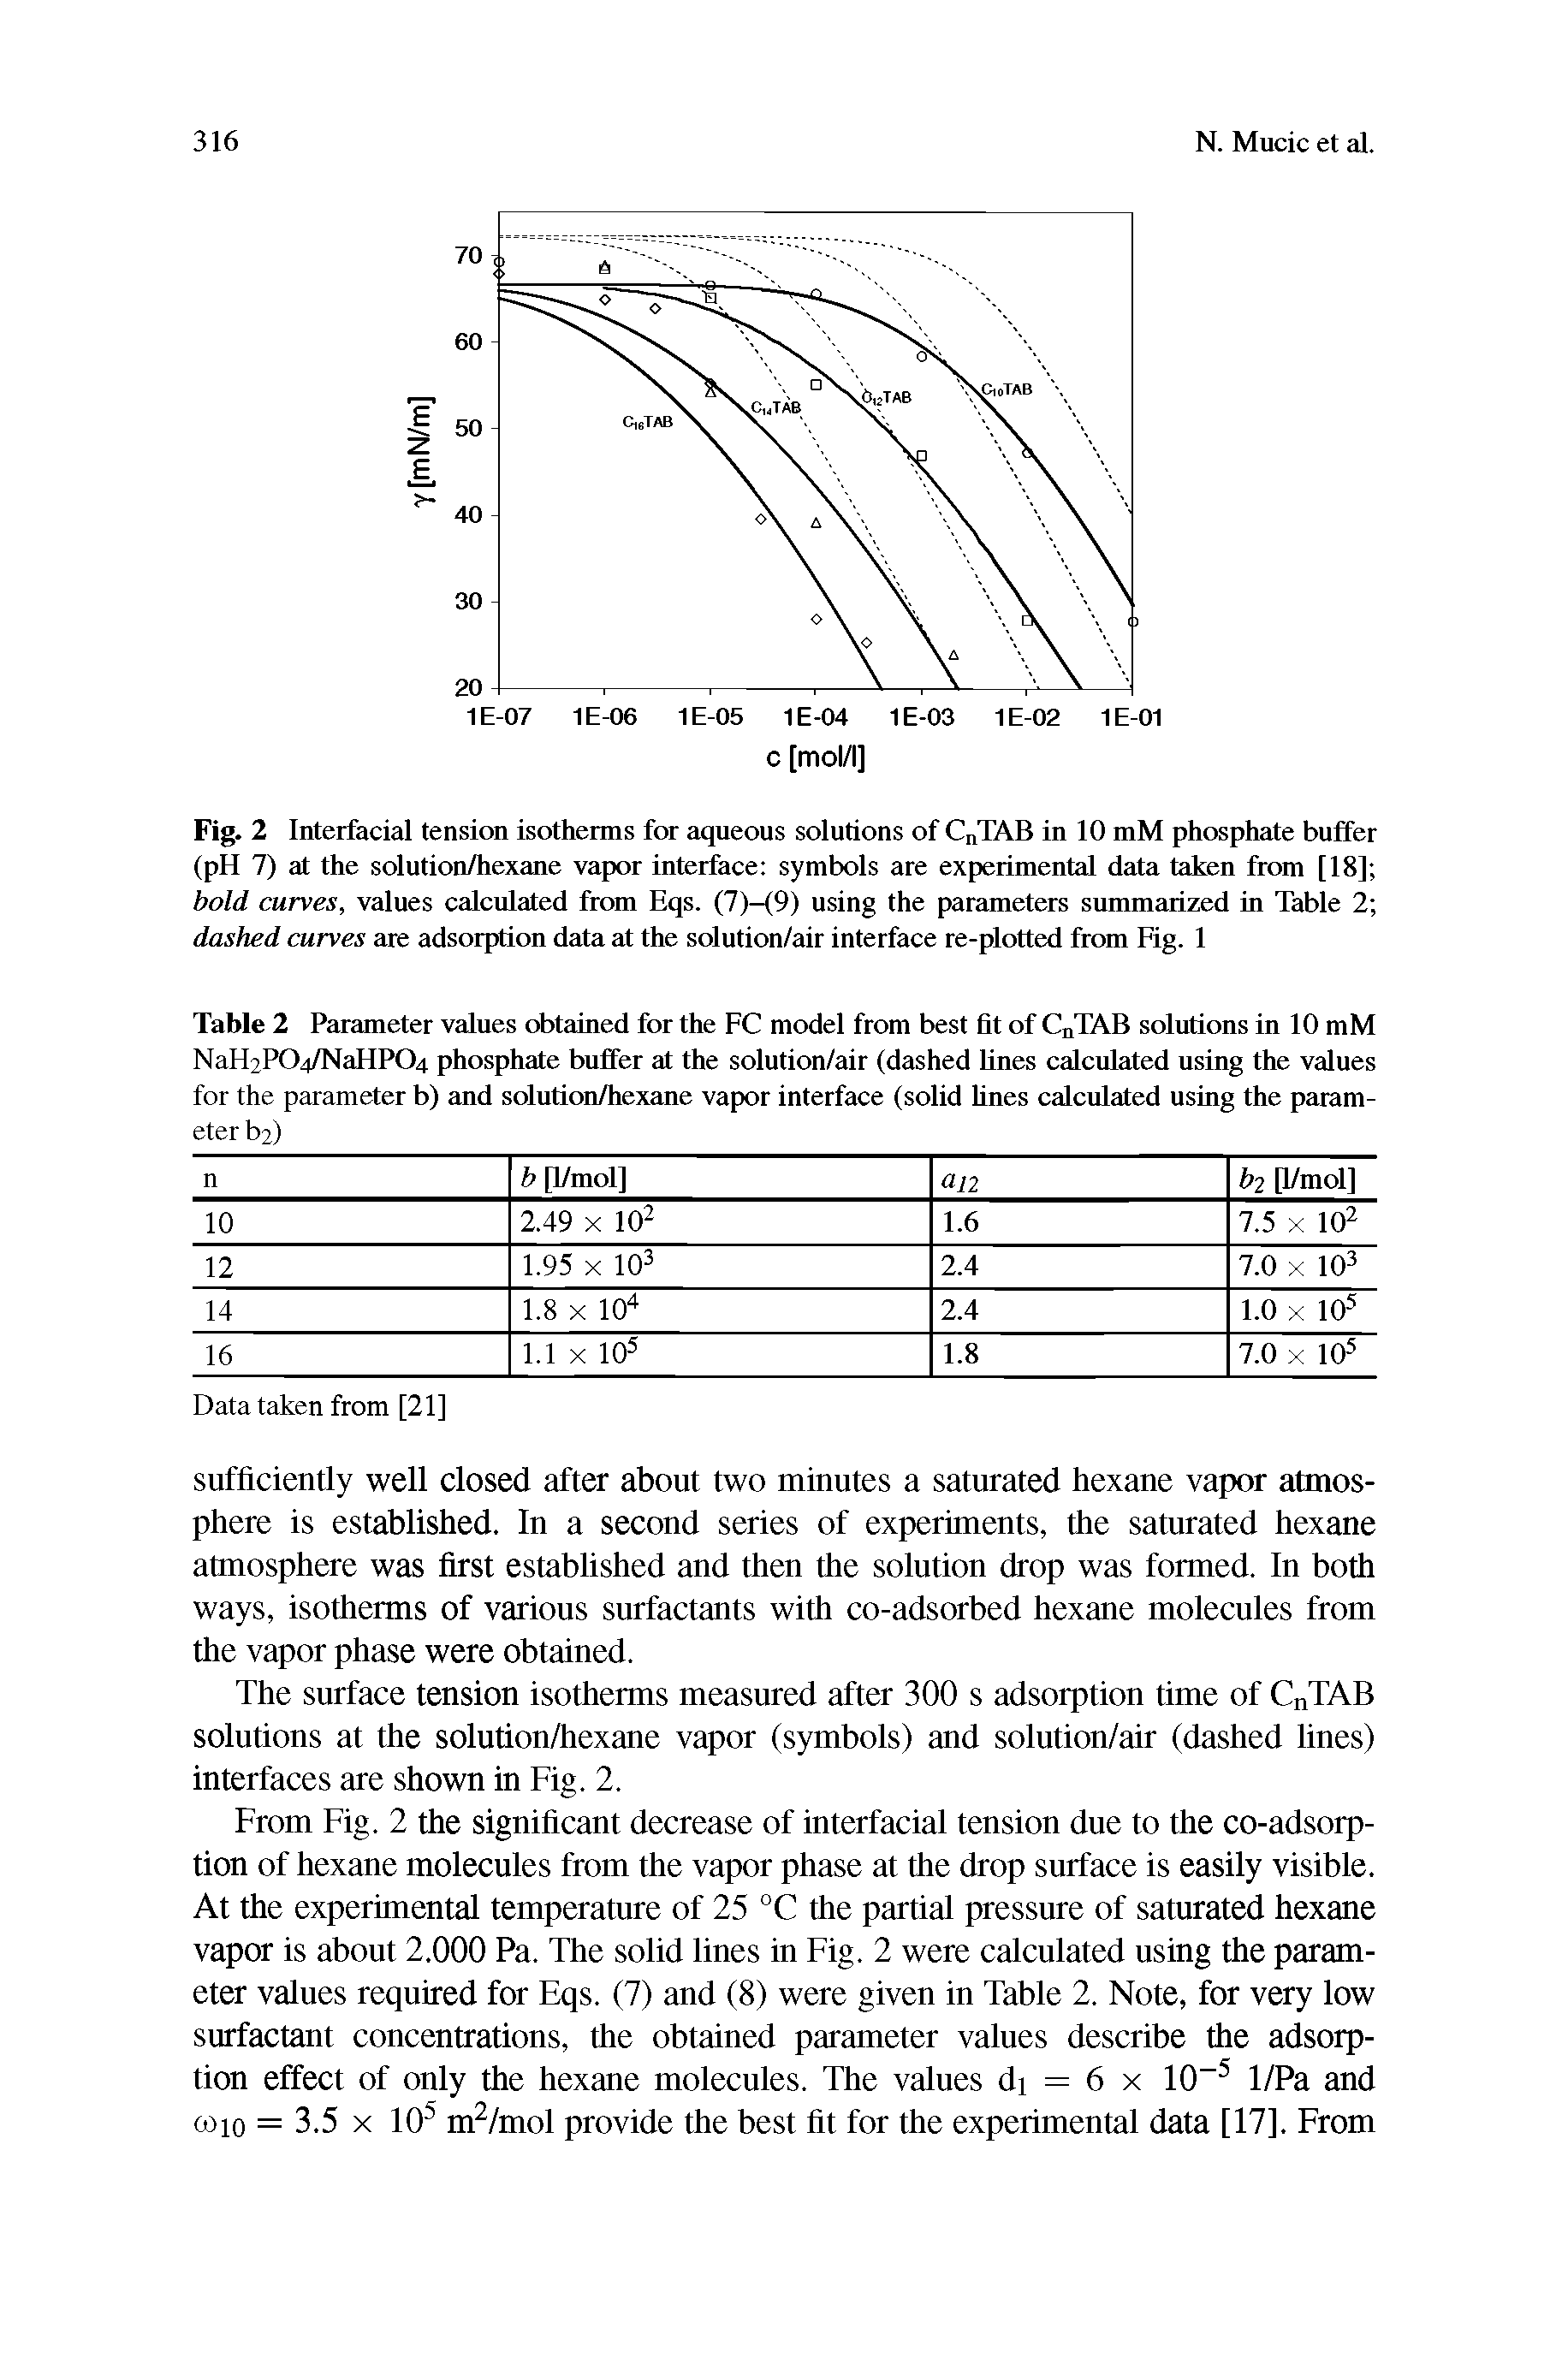 Fig. 2 Interfacial tension isotherms for aqueous solutions of CnTAB in 10 mM phosphate buffer (pH 7) at the solution/hexane vapor interface symbols are experimental data taken from [18] bold curves, values calculated from Eqs. (7)-(9) using the parameters summarized in Table 2 dashed curves are adsorption data at the solution/eiir interface re-plotted from Fig. 1...